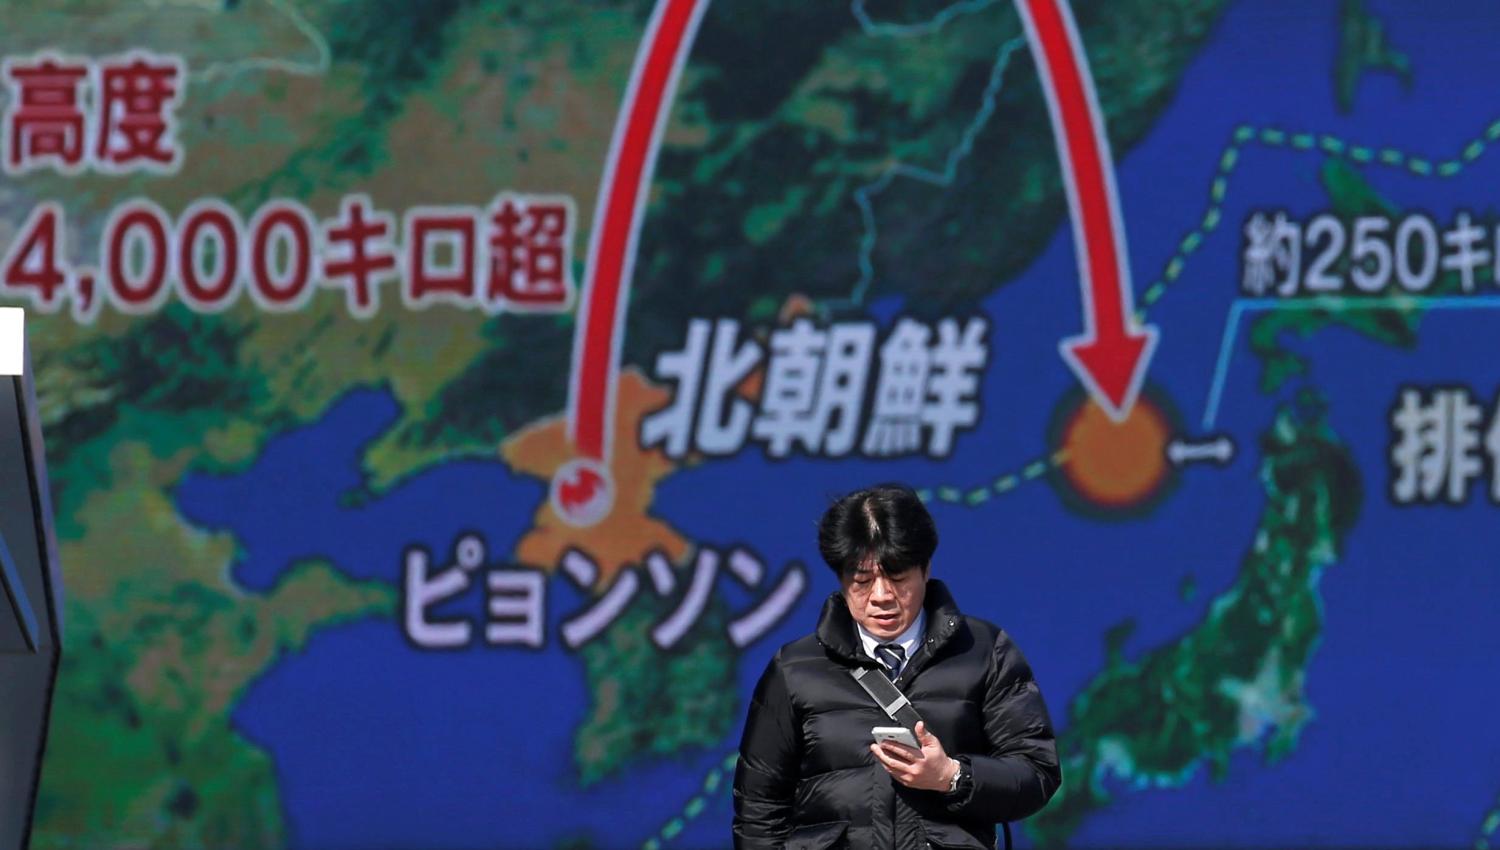 A man walks past a street monitor showing a news report about North Korea's missile launch, in Tokyo, Japan, November 29, 2017. REUTERS/Toru Hanai - RC14E67BAE70